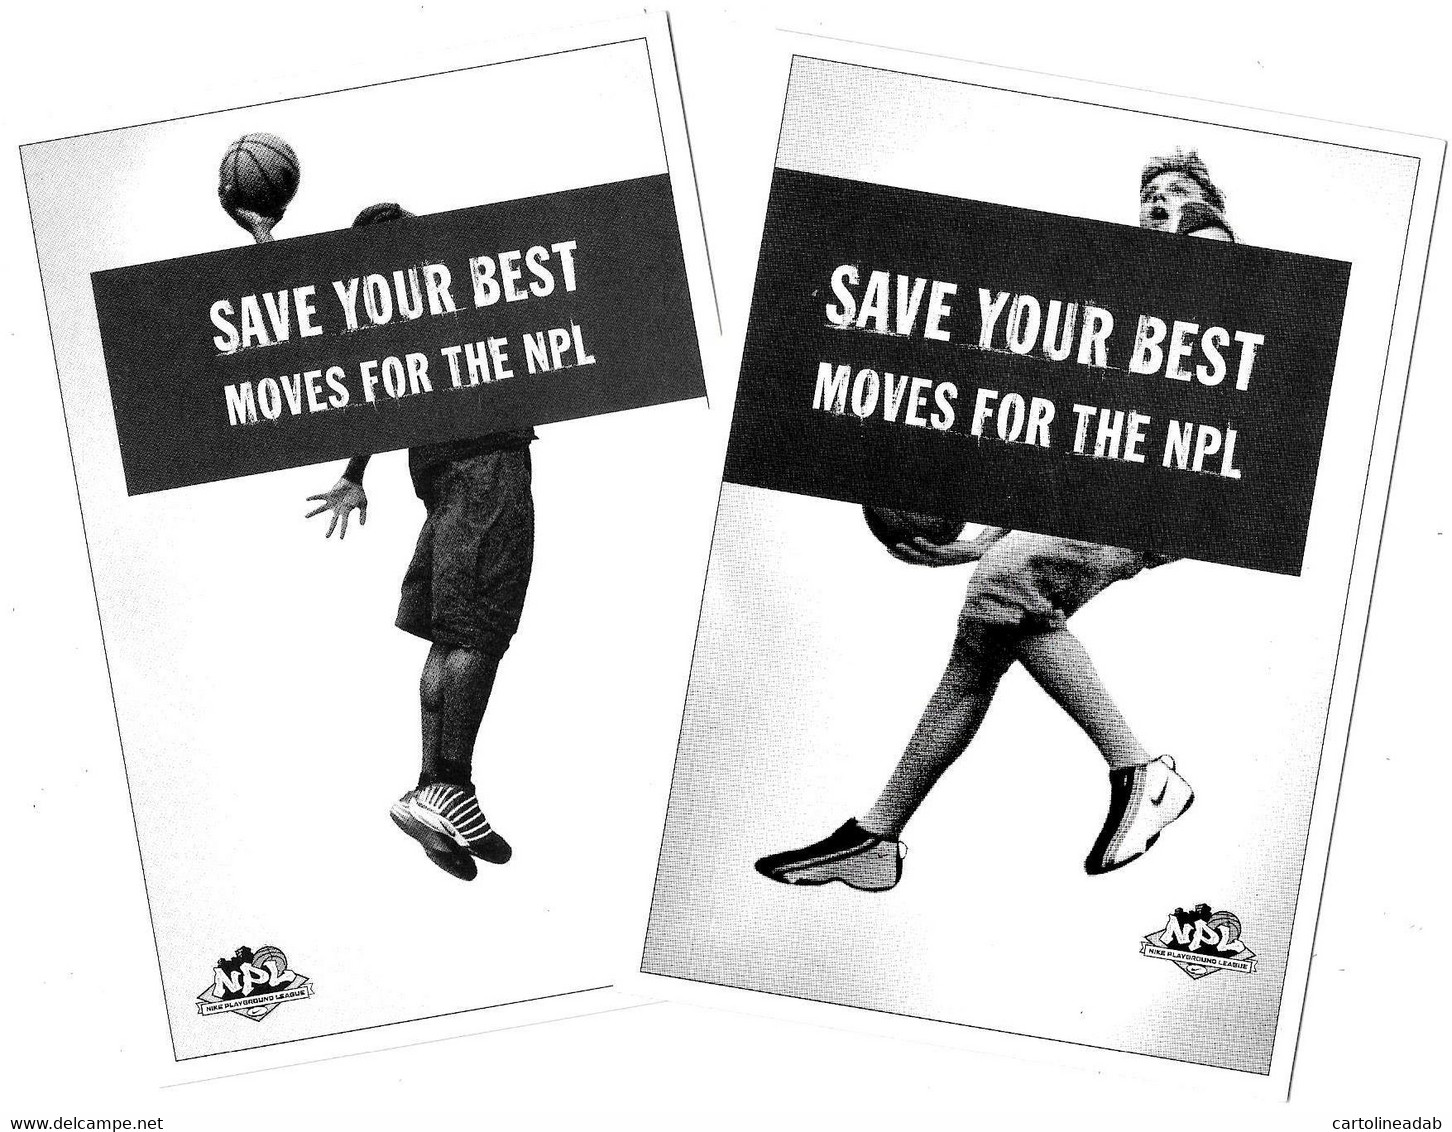 [MD5585] CPM - SERIE 2 CARTOLINE - SAVE YOUR BEST MOVES FOR THE NPL - PROMOCARD 2302 2303 - PERFETTE - Non Viaggiate - Basket-ball